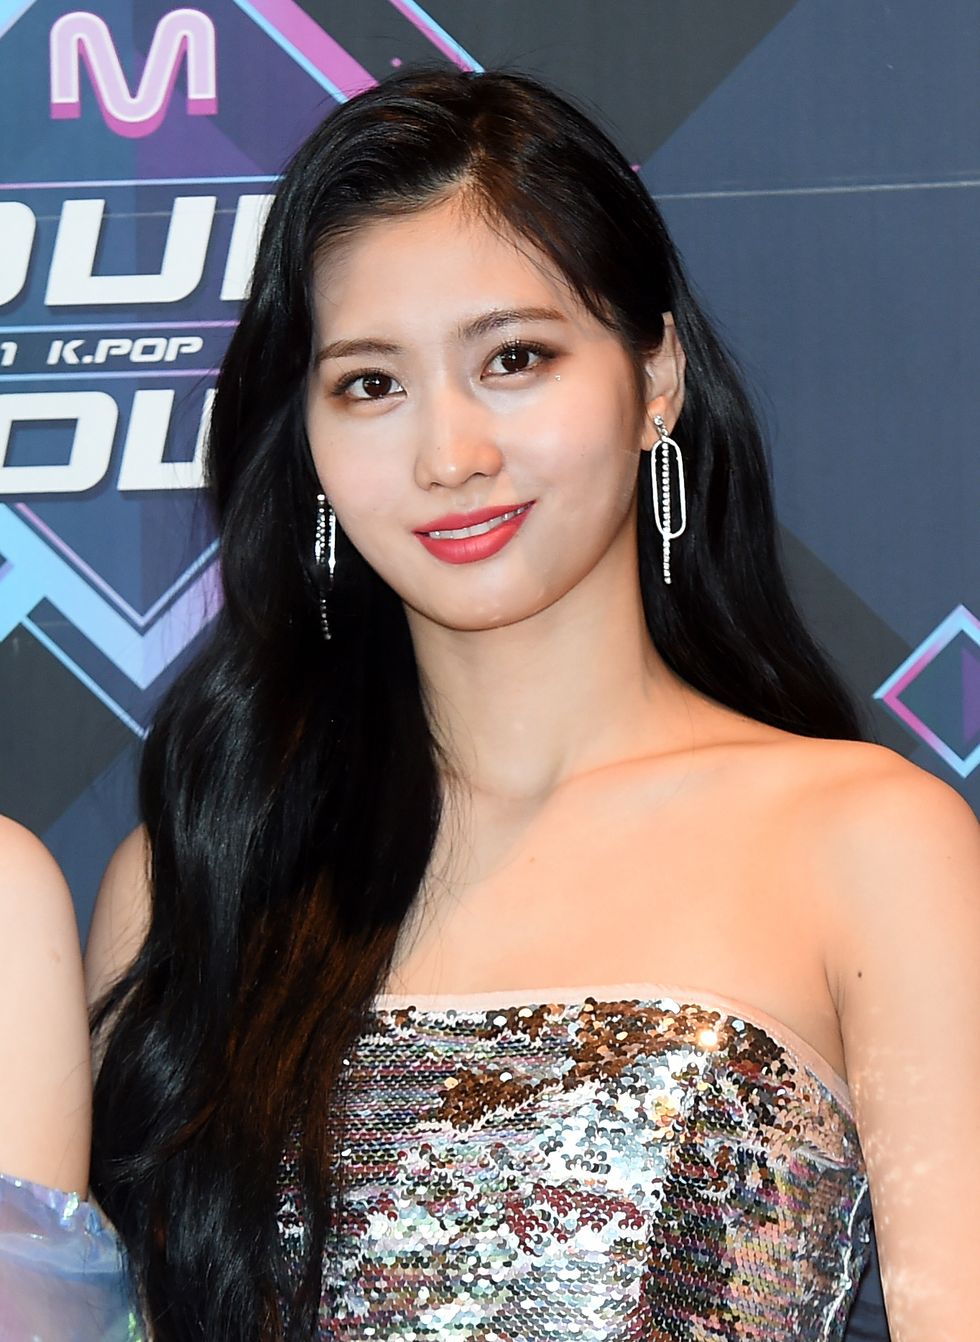 momo of twice arrived to rehearsal for m countdown on september 26, 2019 in seoul, south korea 2019 09 26